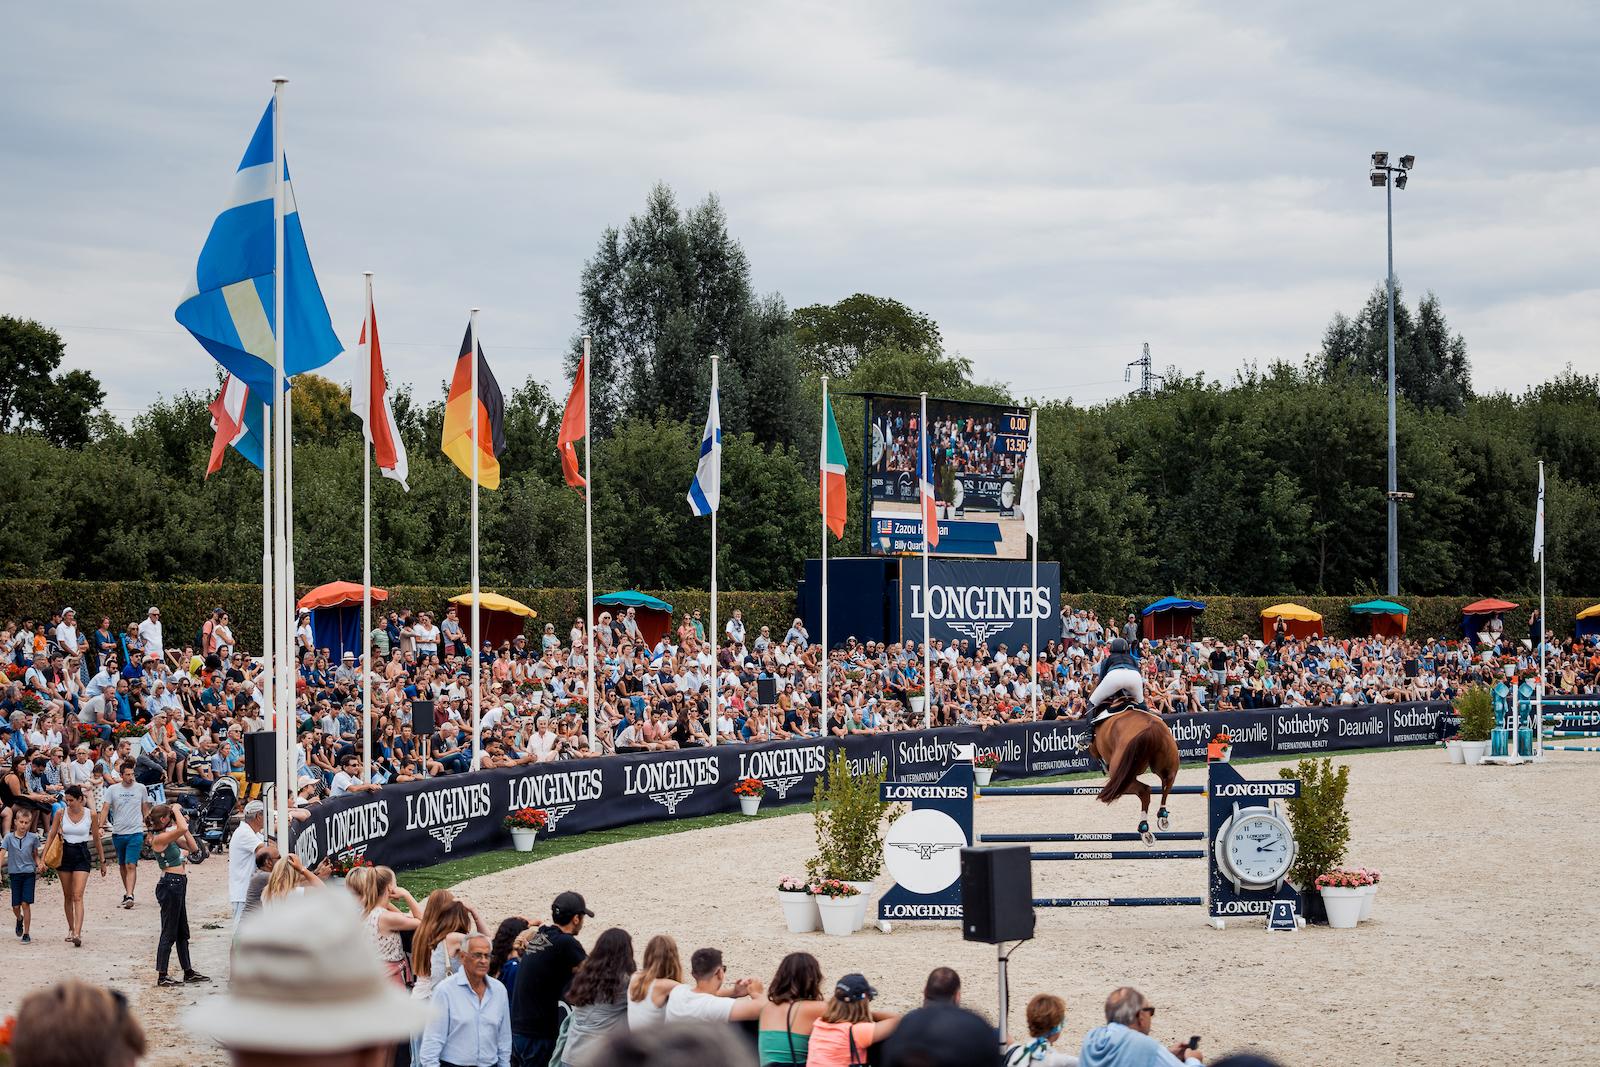 A crazy crowd gathered around the Longines International Horse Pole in Deauville.